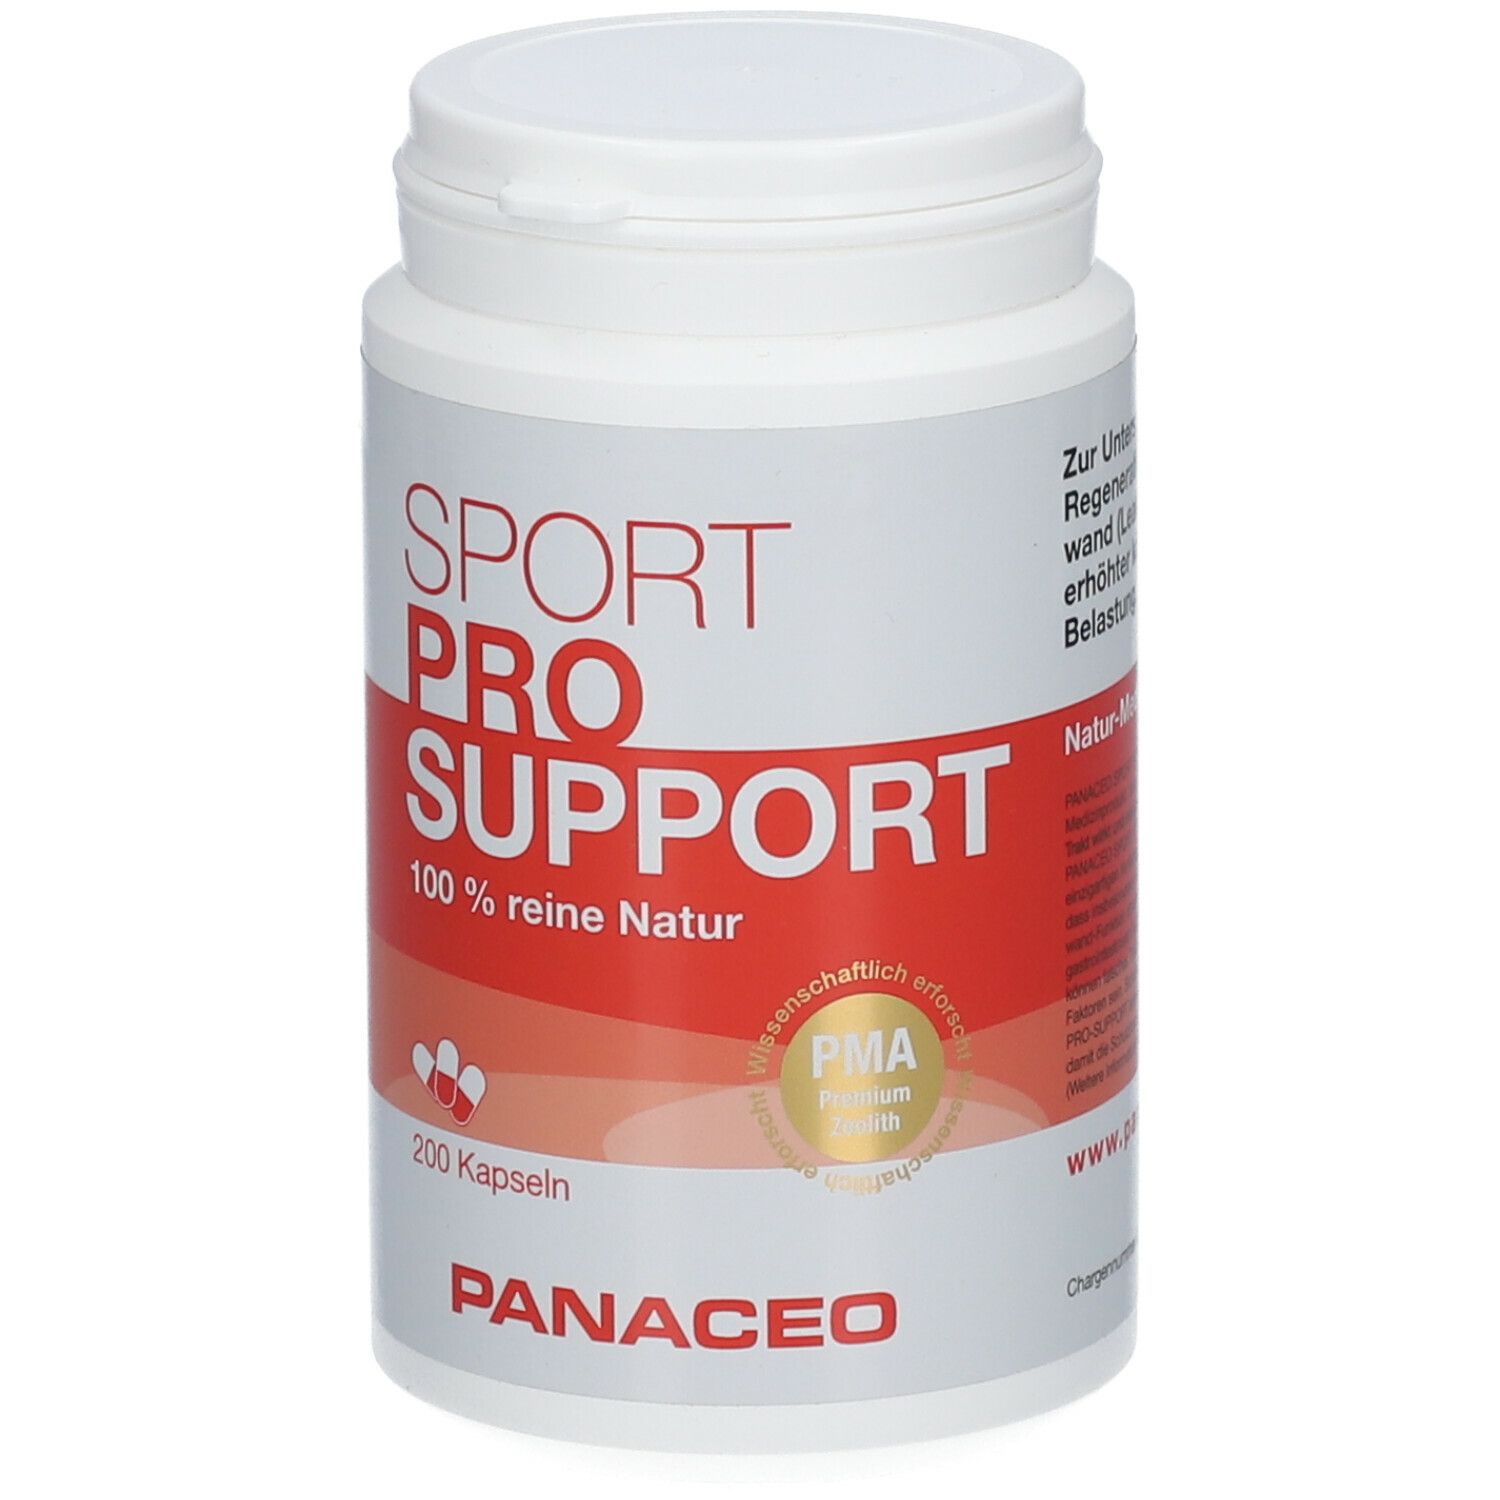 SPORT PRO SUPPORT PANACEO